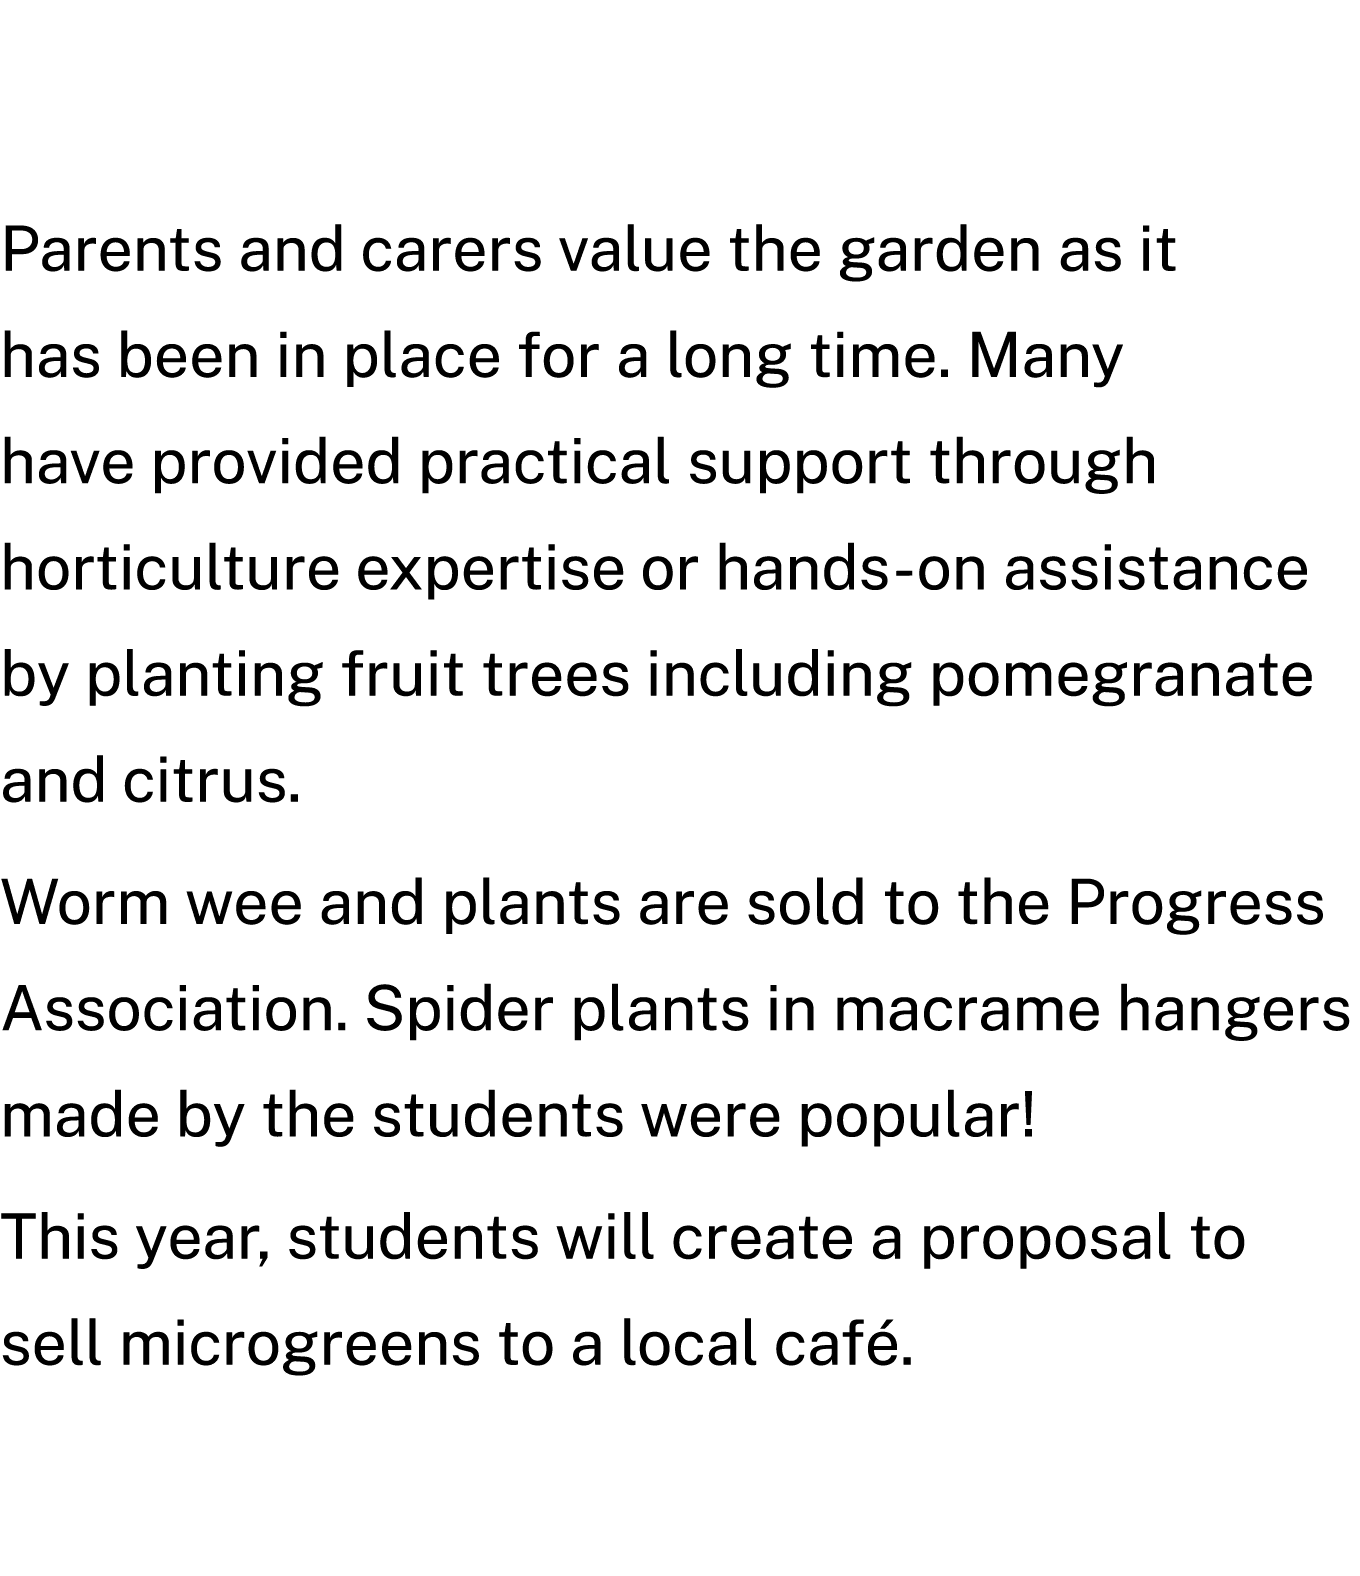 Parents and carers value the garden as it has been in place for a long time. Many have provided practical support thr...